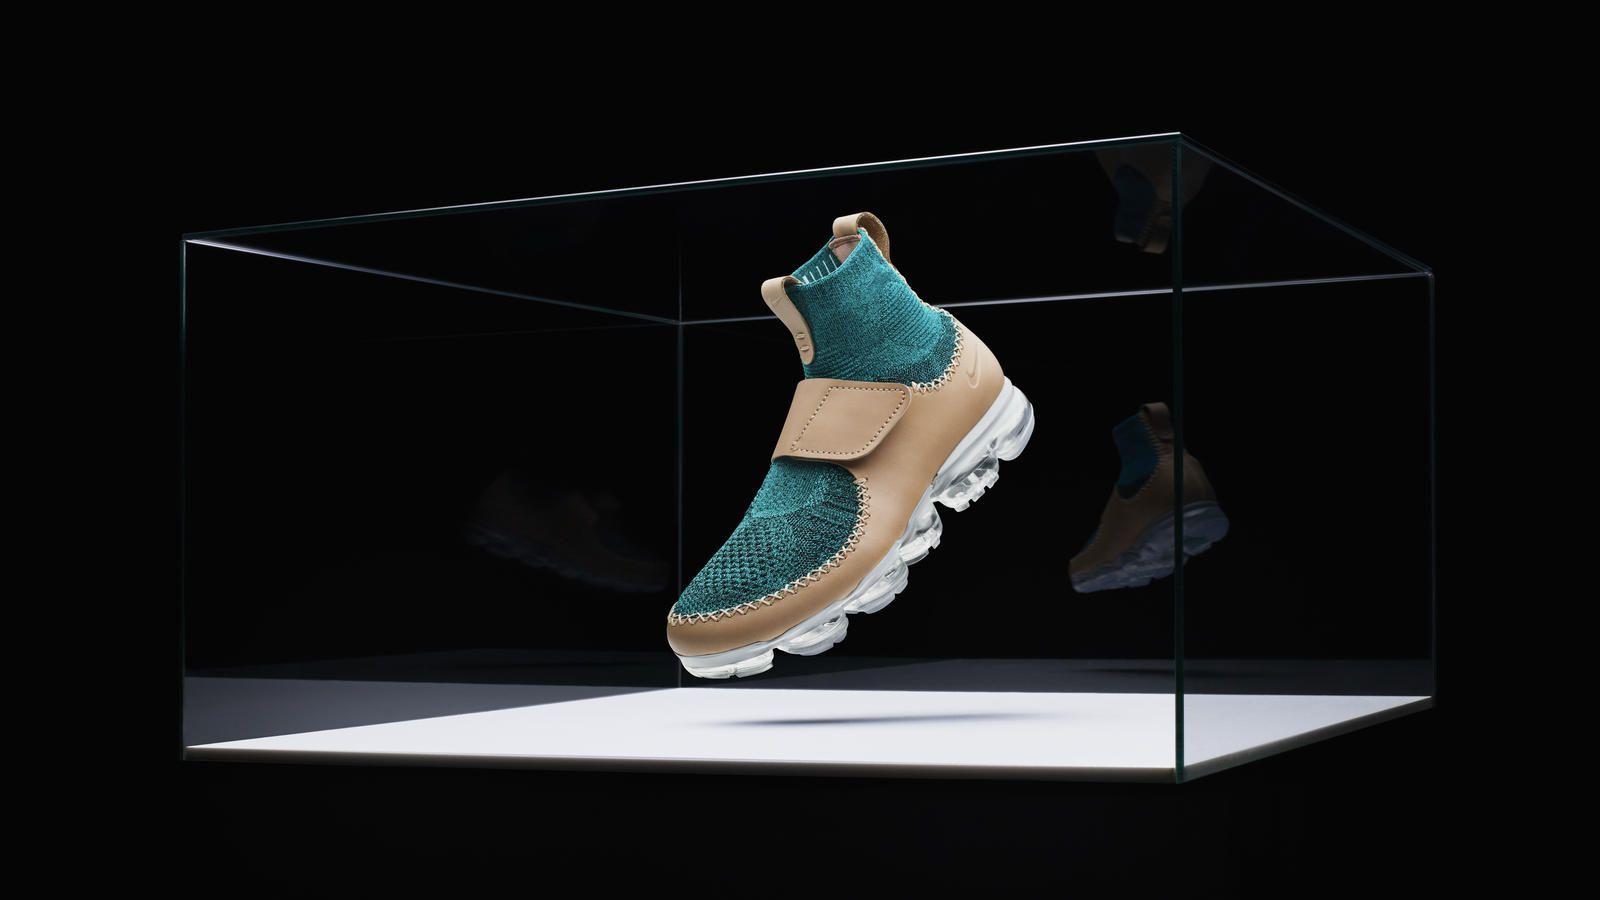 NIKELAB Partners With VISION AIRS To Celebrate Nike Air And Air Max